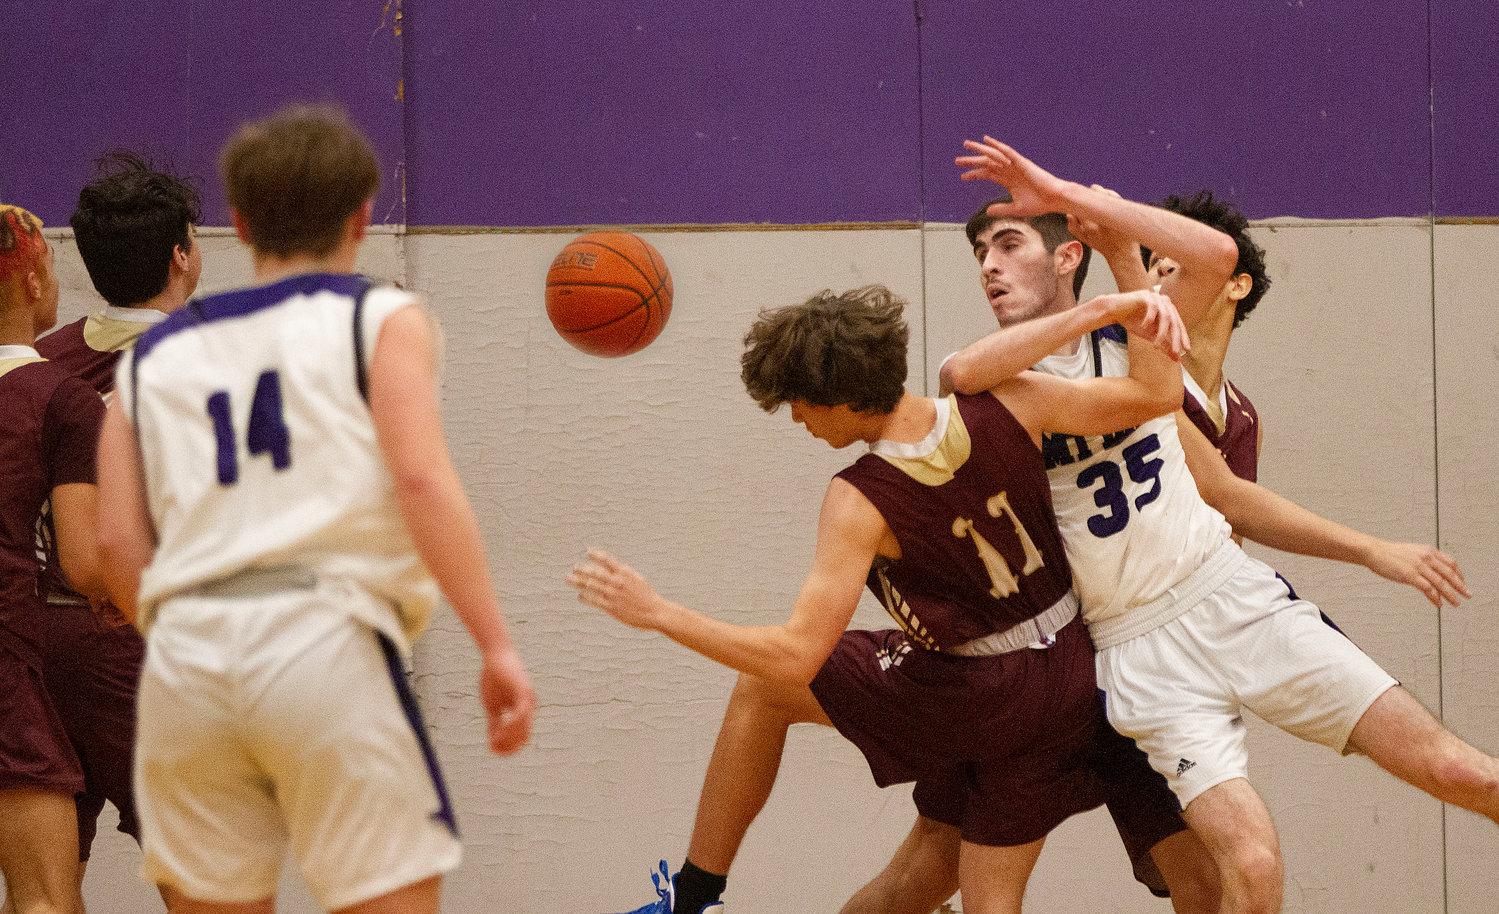 Mt. hope's James Rustici vies for a rebound with a pair of Tiverton players.